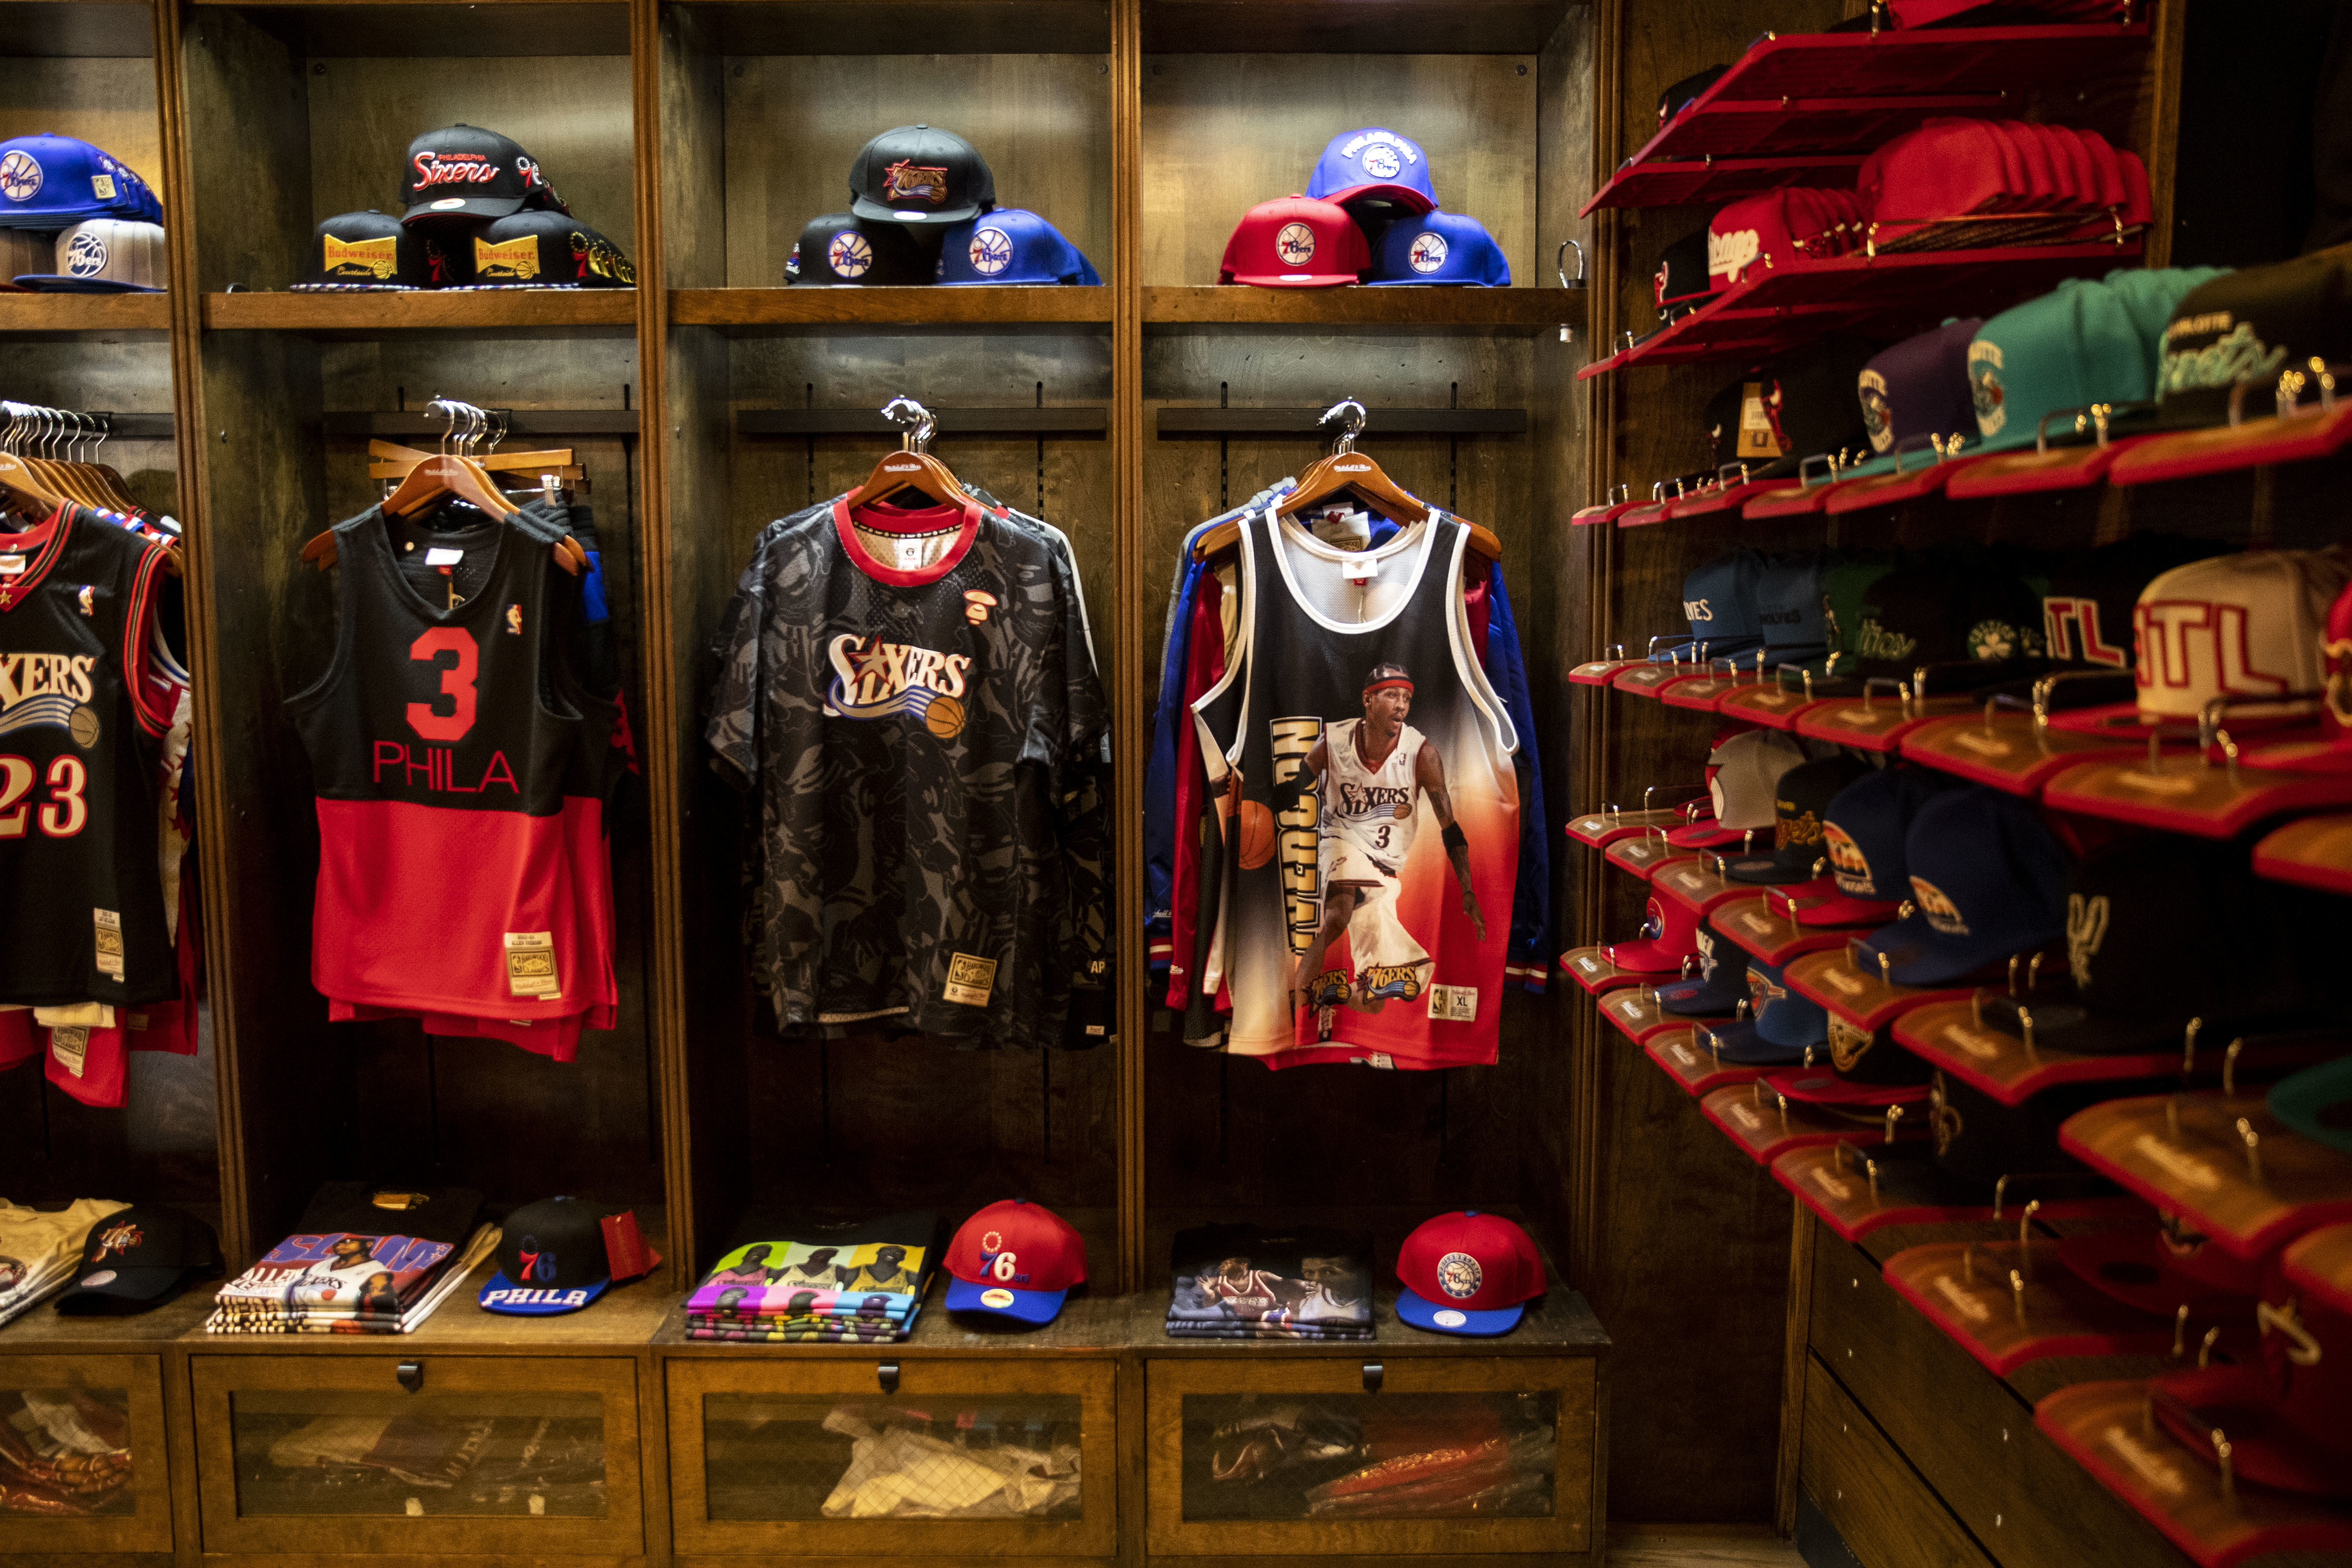 76ers store